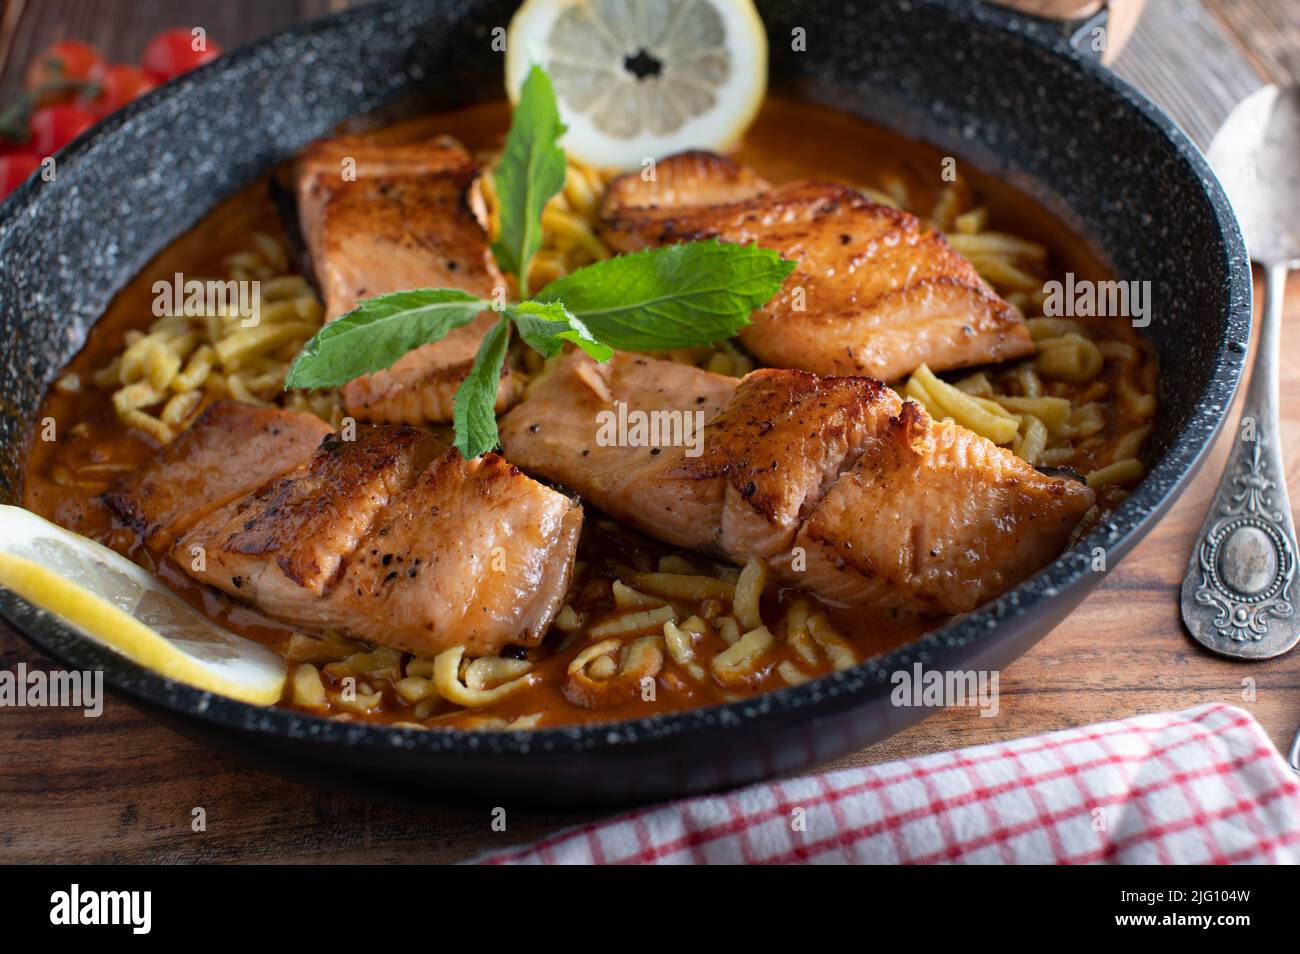 Pan seared salmon fillet with tomato cream sauce and spaetzle noodles Stock Photo